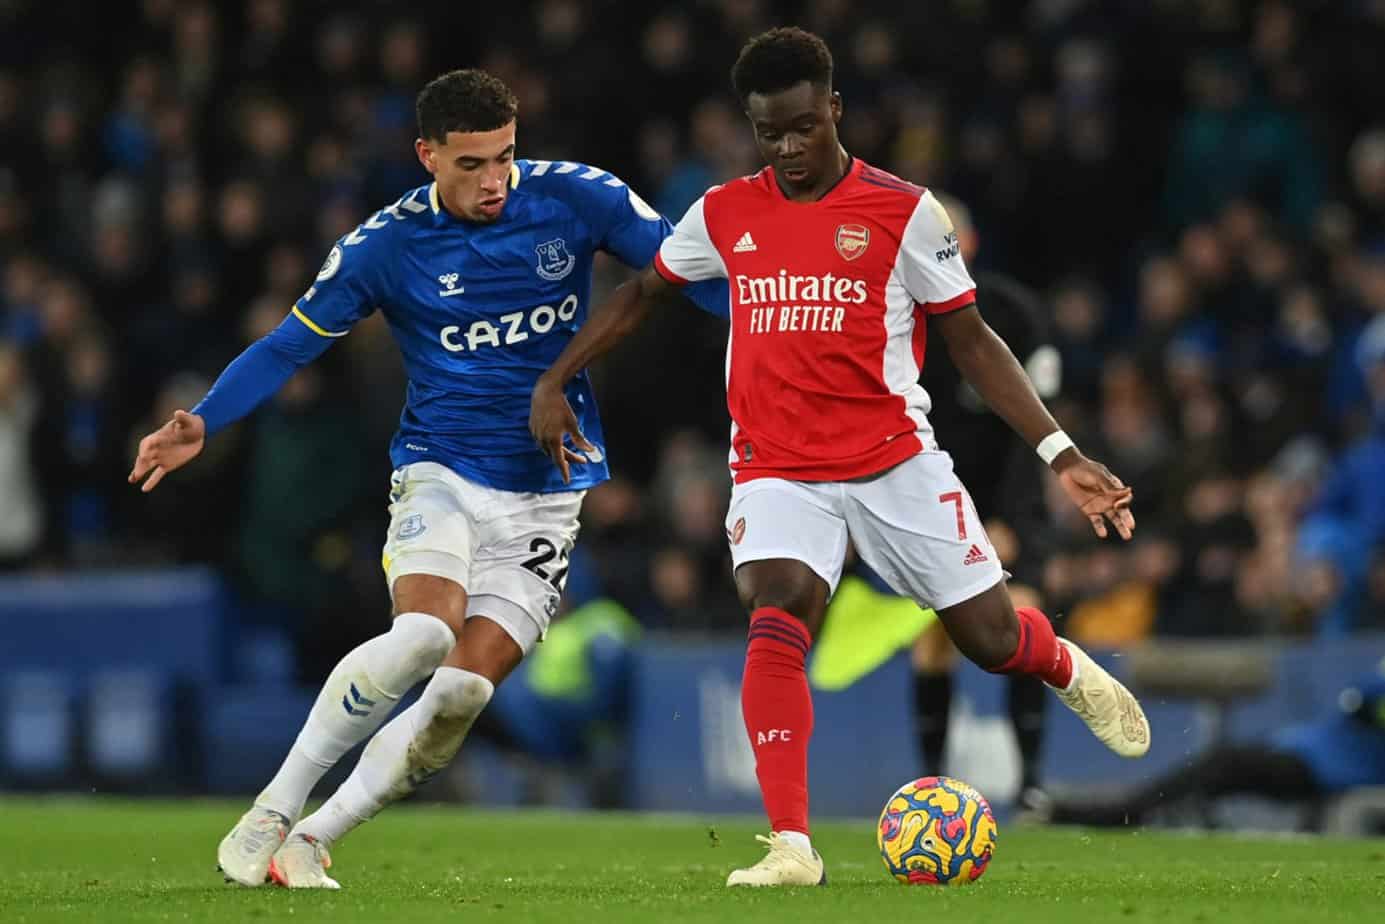 Everton vs. Arsenal Betting Odds and Prediction